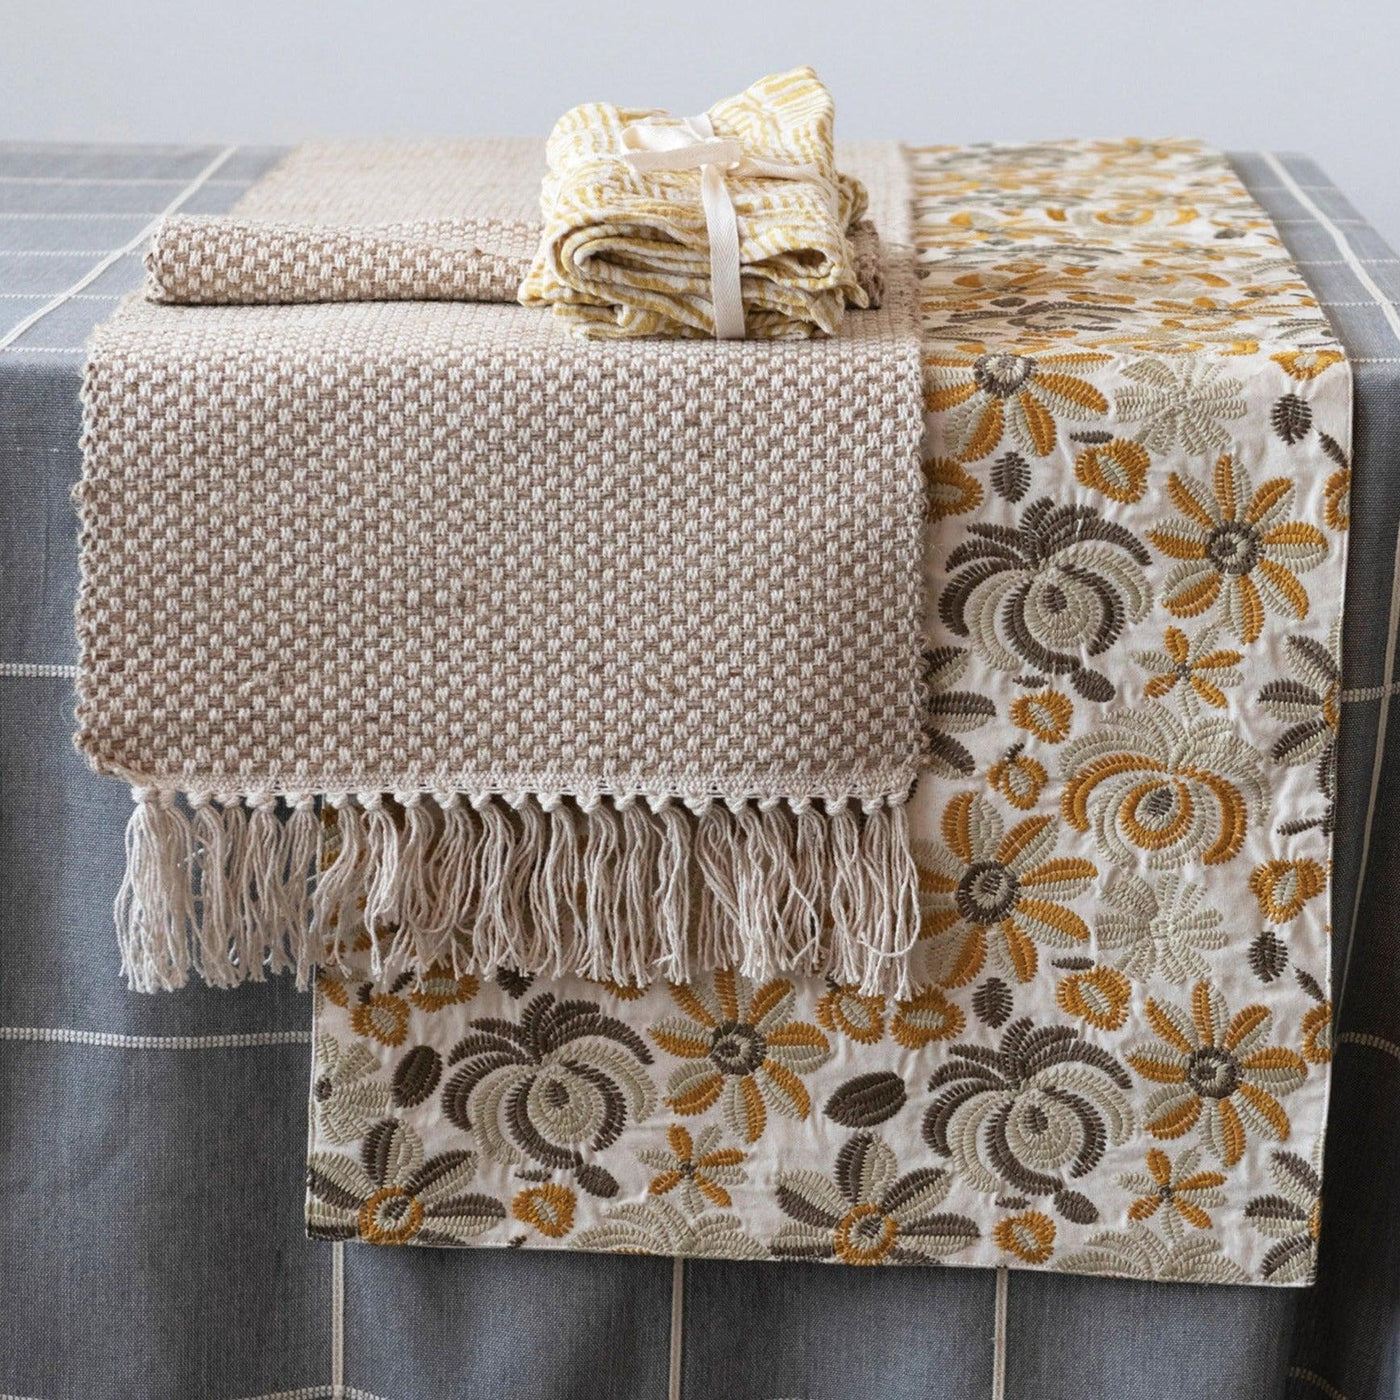 Woven Jute and Cotton Table Runner with Fringe - Birch and Bind